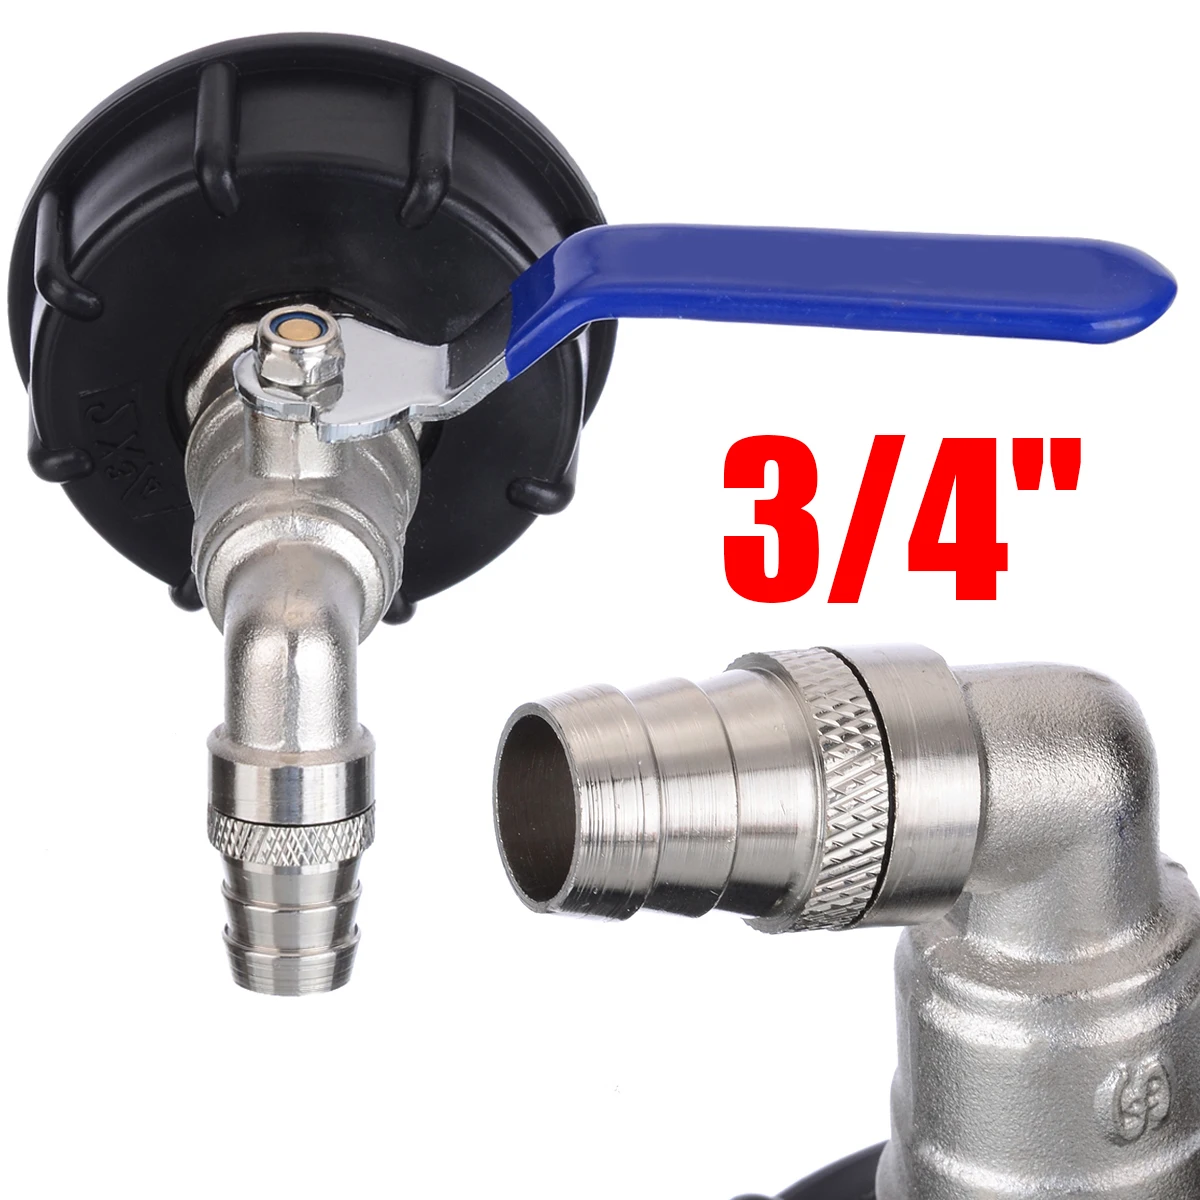 3/4" IBC Outlet Tap Adapter 1000L Tank Rain Water Container Fitting Connector 